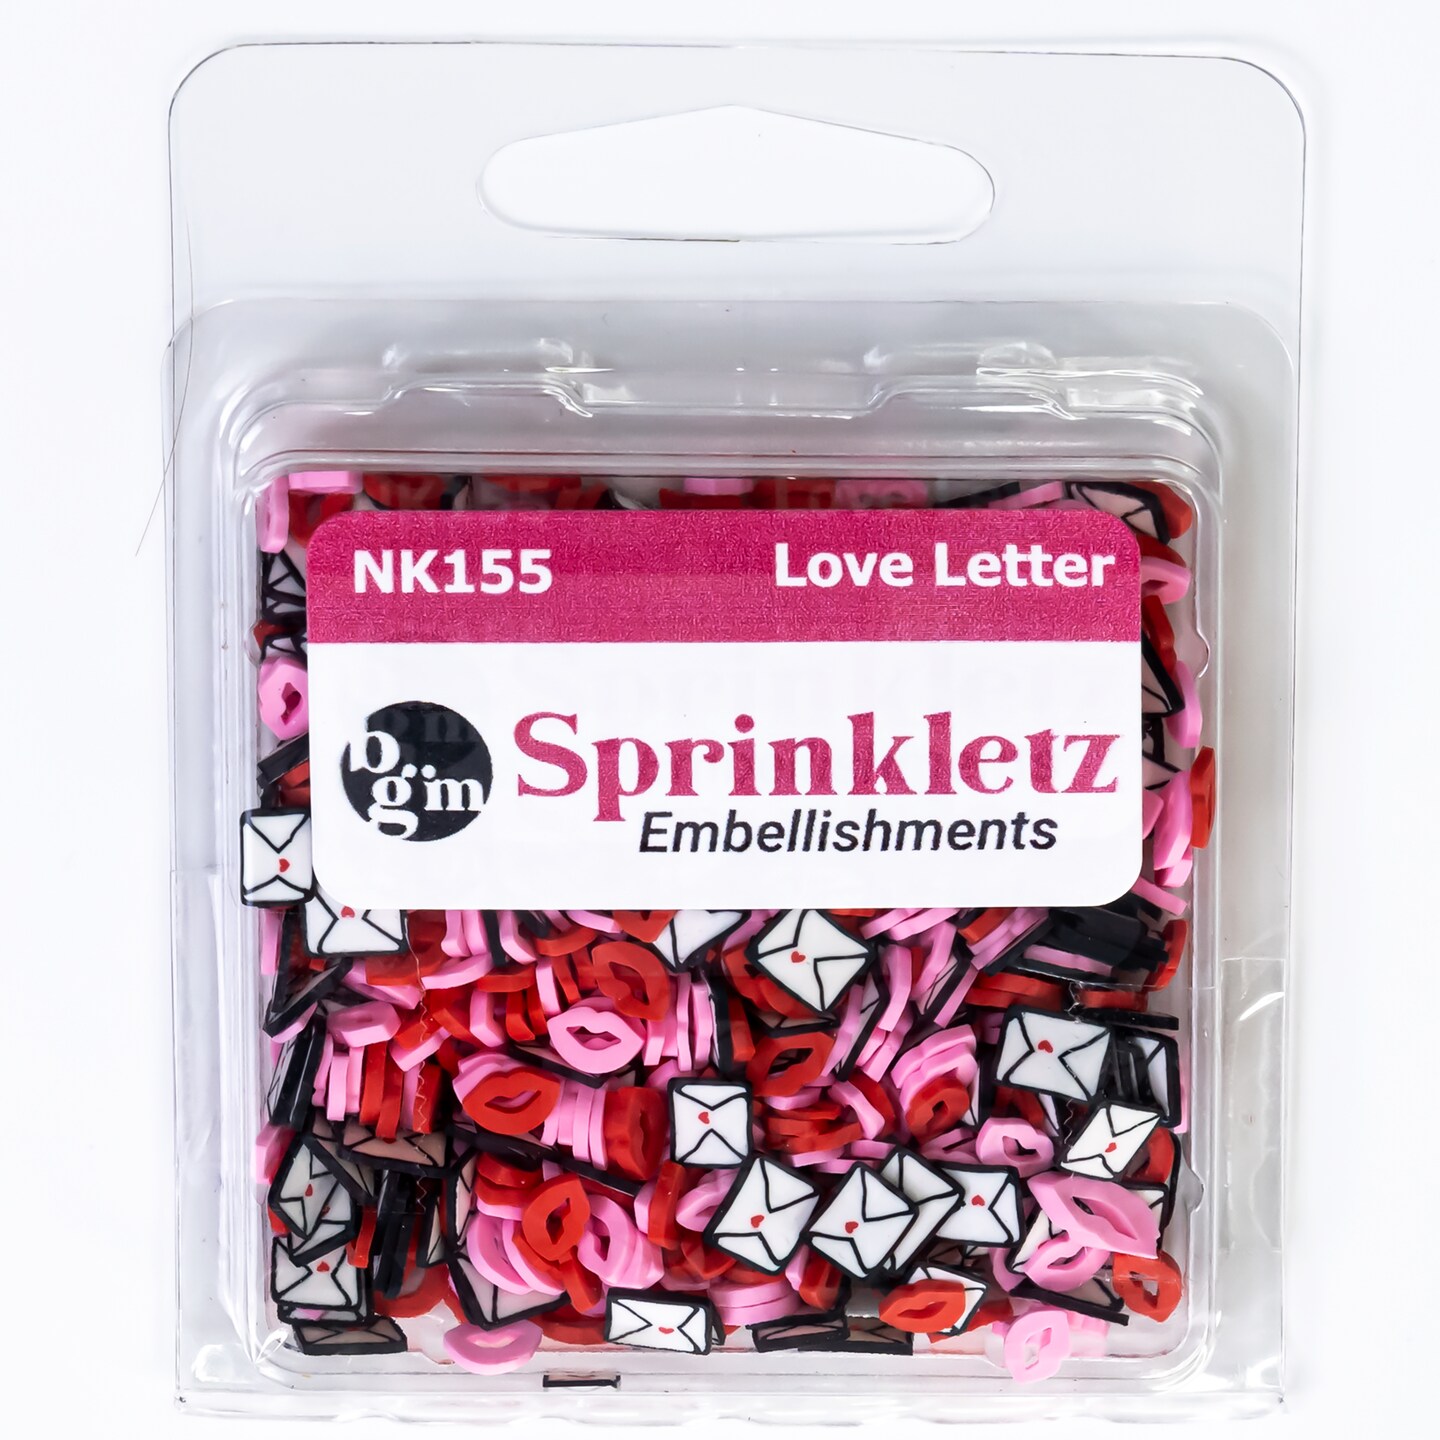 Buttons Galore Sprinkletz Embellishments for Crafts, Tiny Polymer Clay  Shapes & Unique Designs - Love Letter- 3 Pack